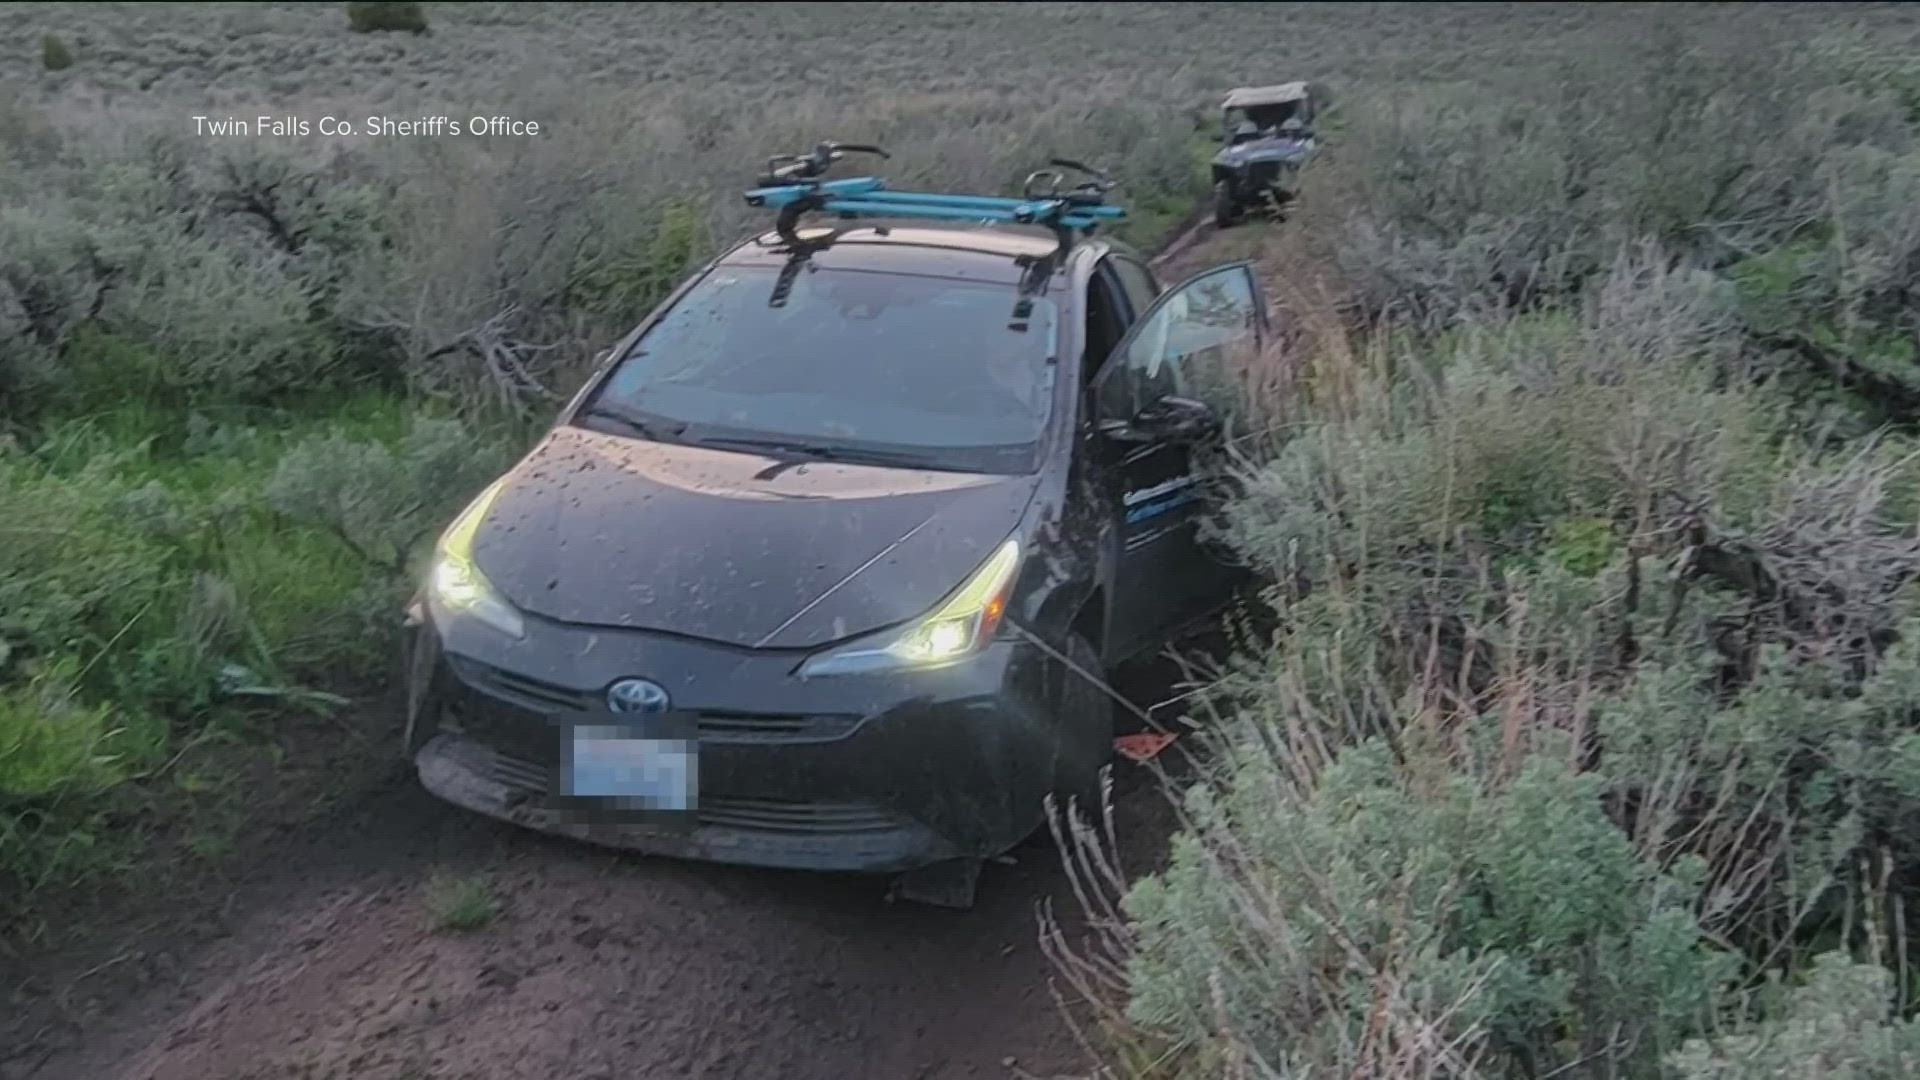 Earlier this week, the Twin Falls County Sheriff's Office responded to a stranded driver who got stuck on a dirt road while following their GPS.